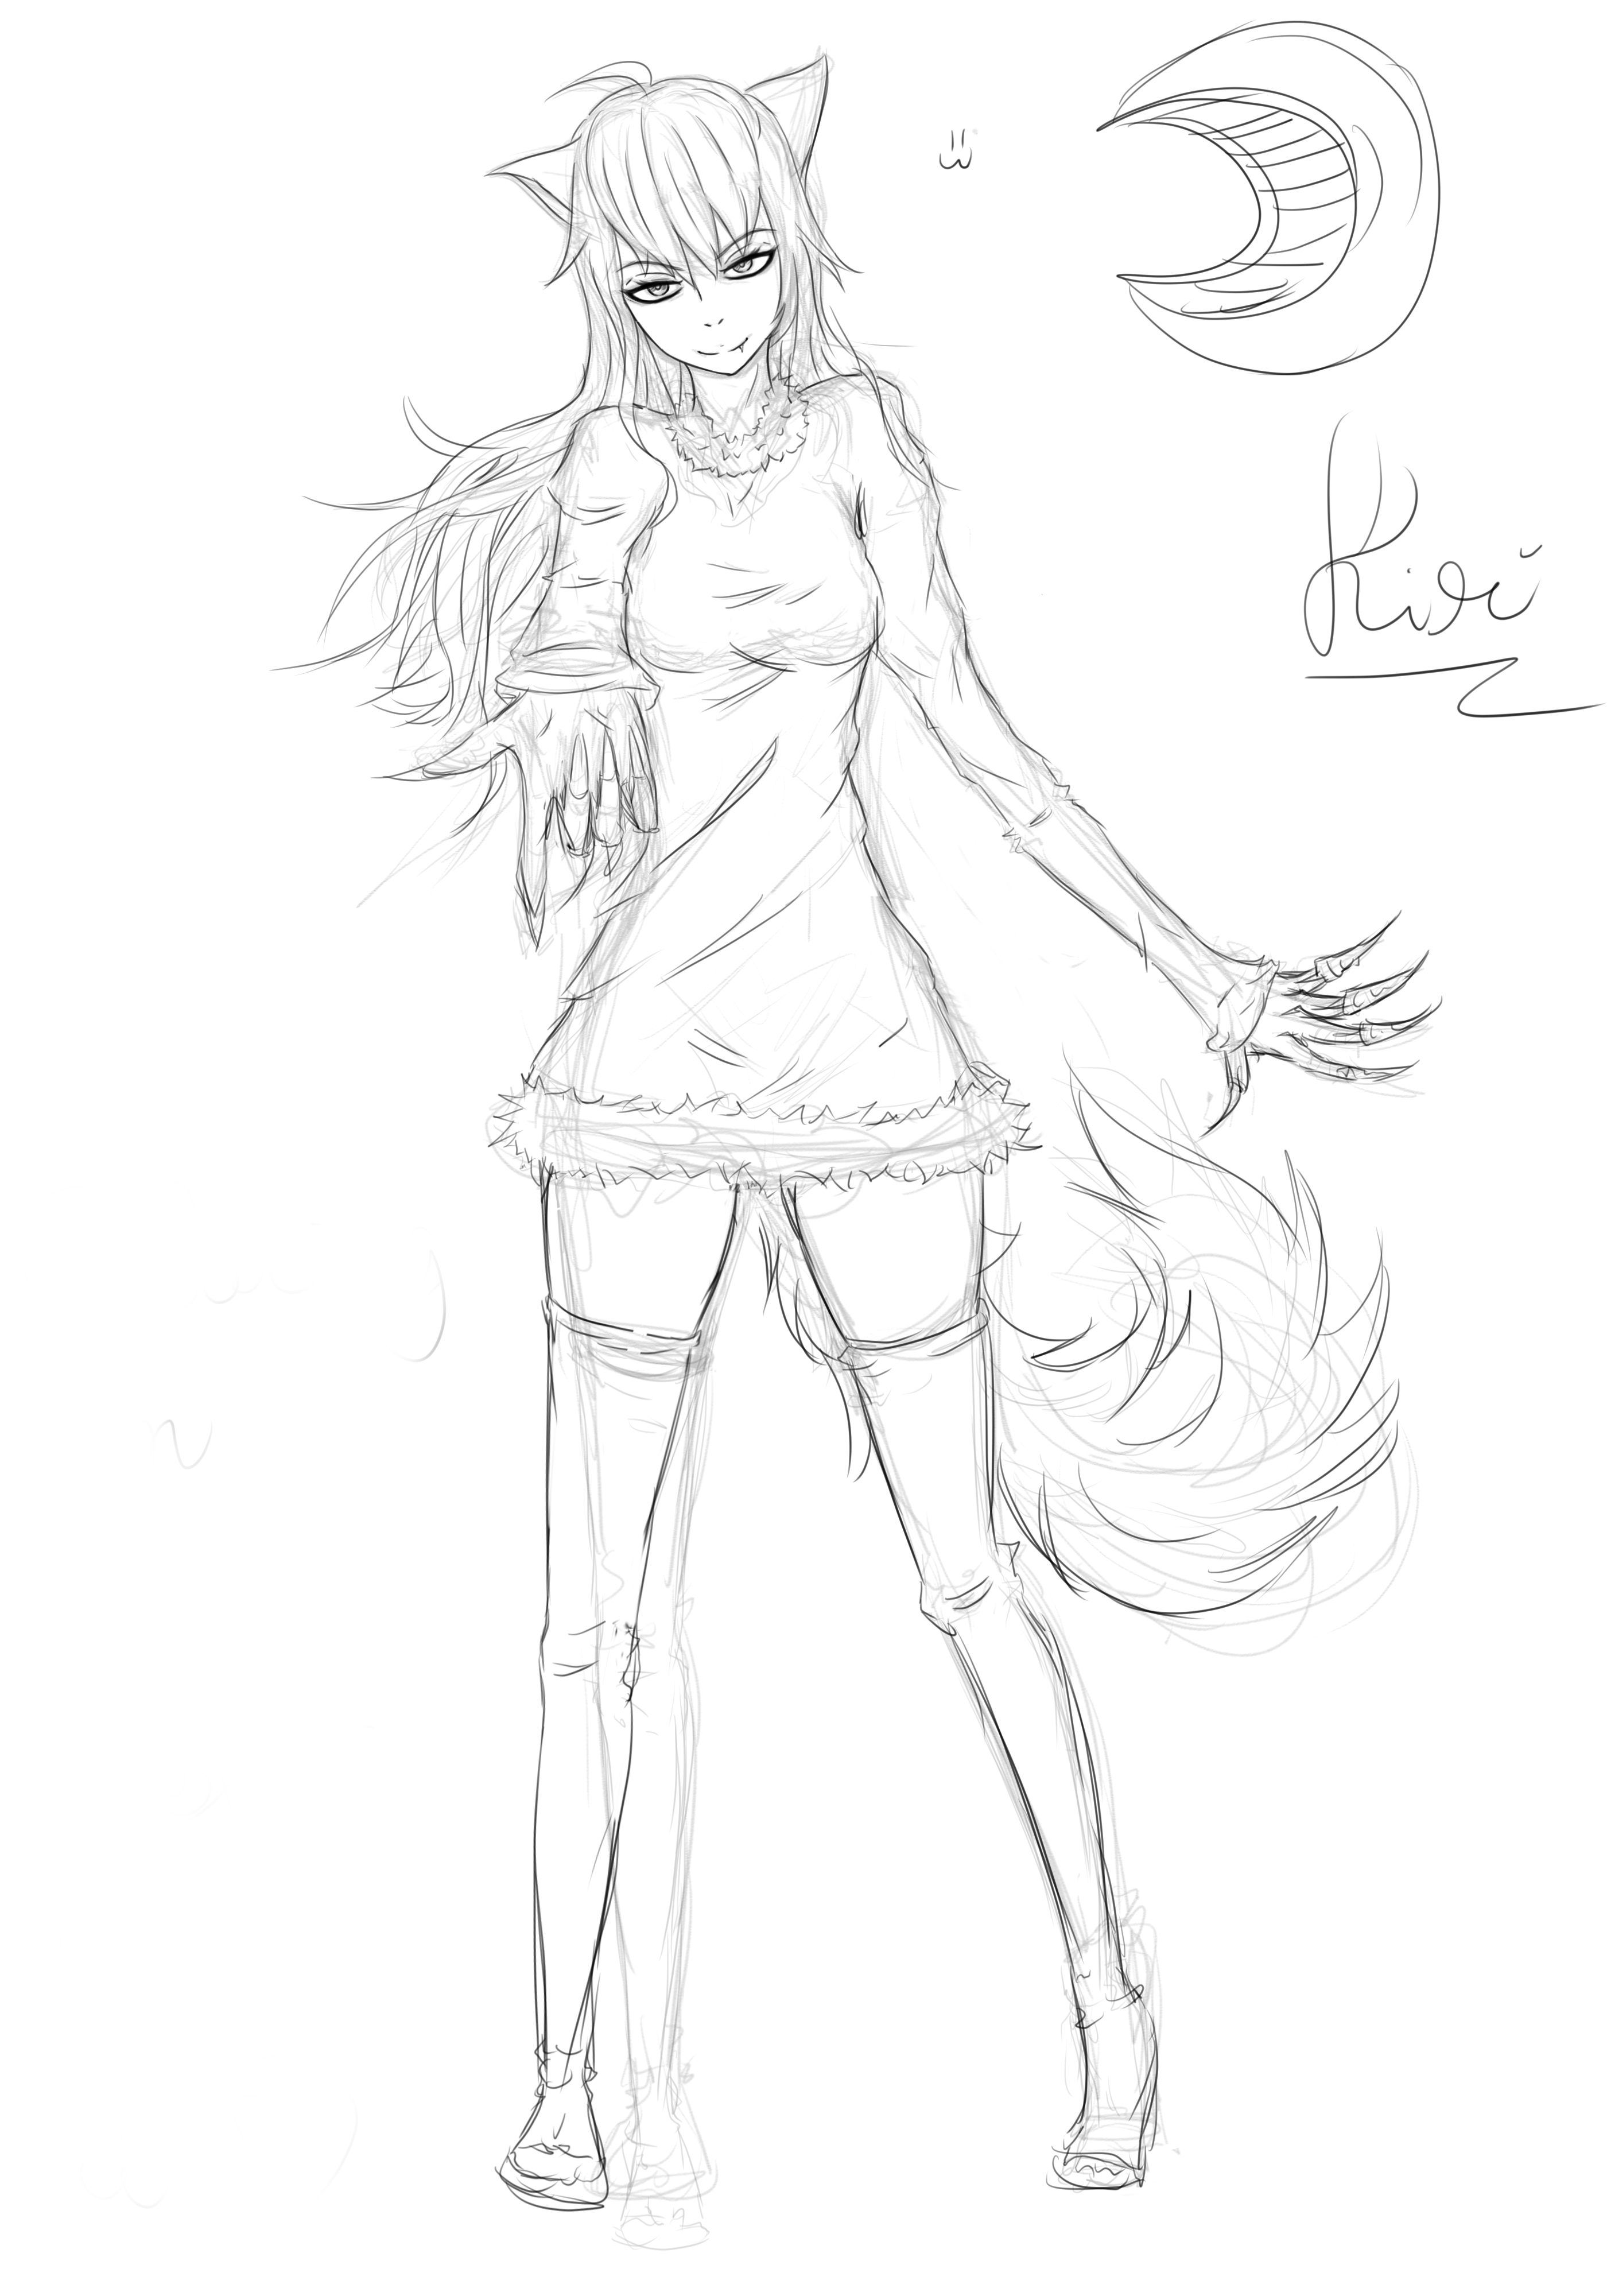 Wolf Girl Sketch =3 by Kiritzugu on DeviantArt
 Girl With Wolf Ears And Tail Drawing